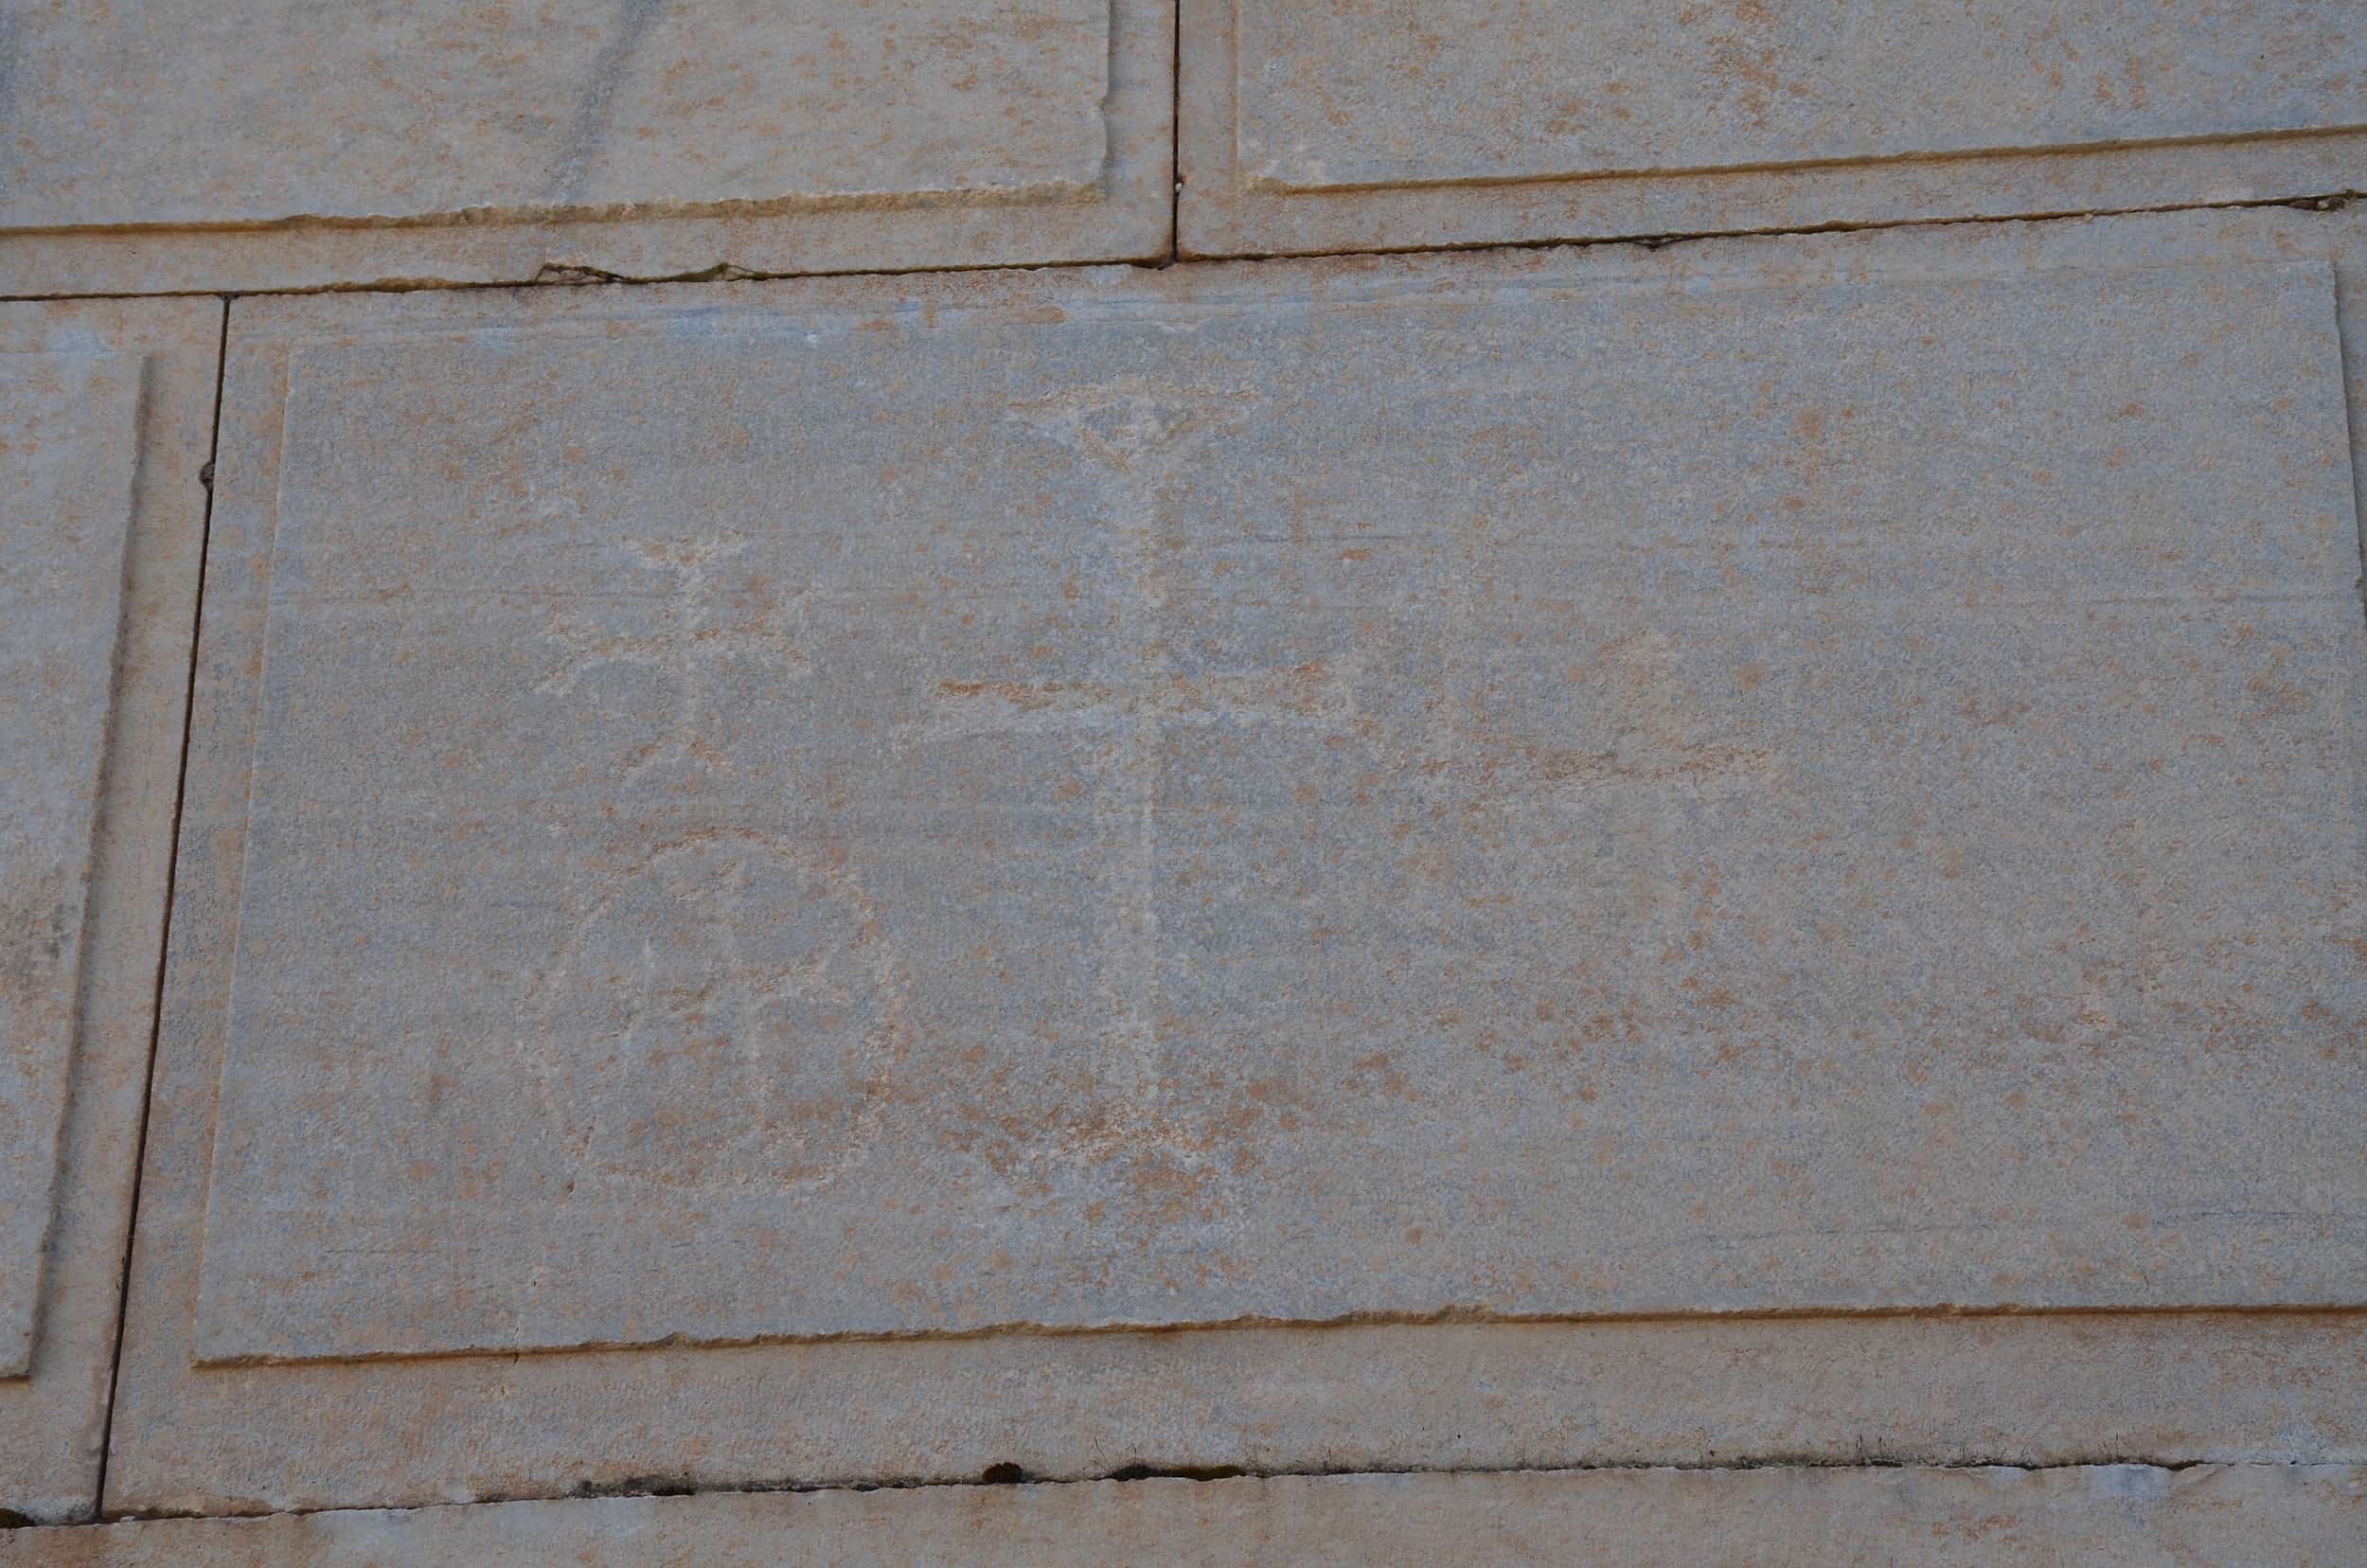 Crosses carved into the Temple of Artemis